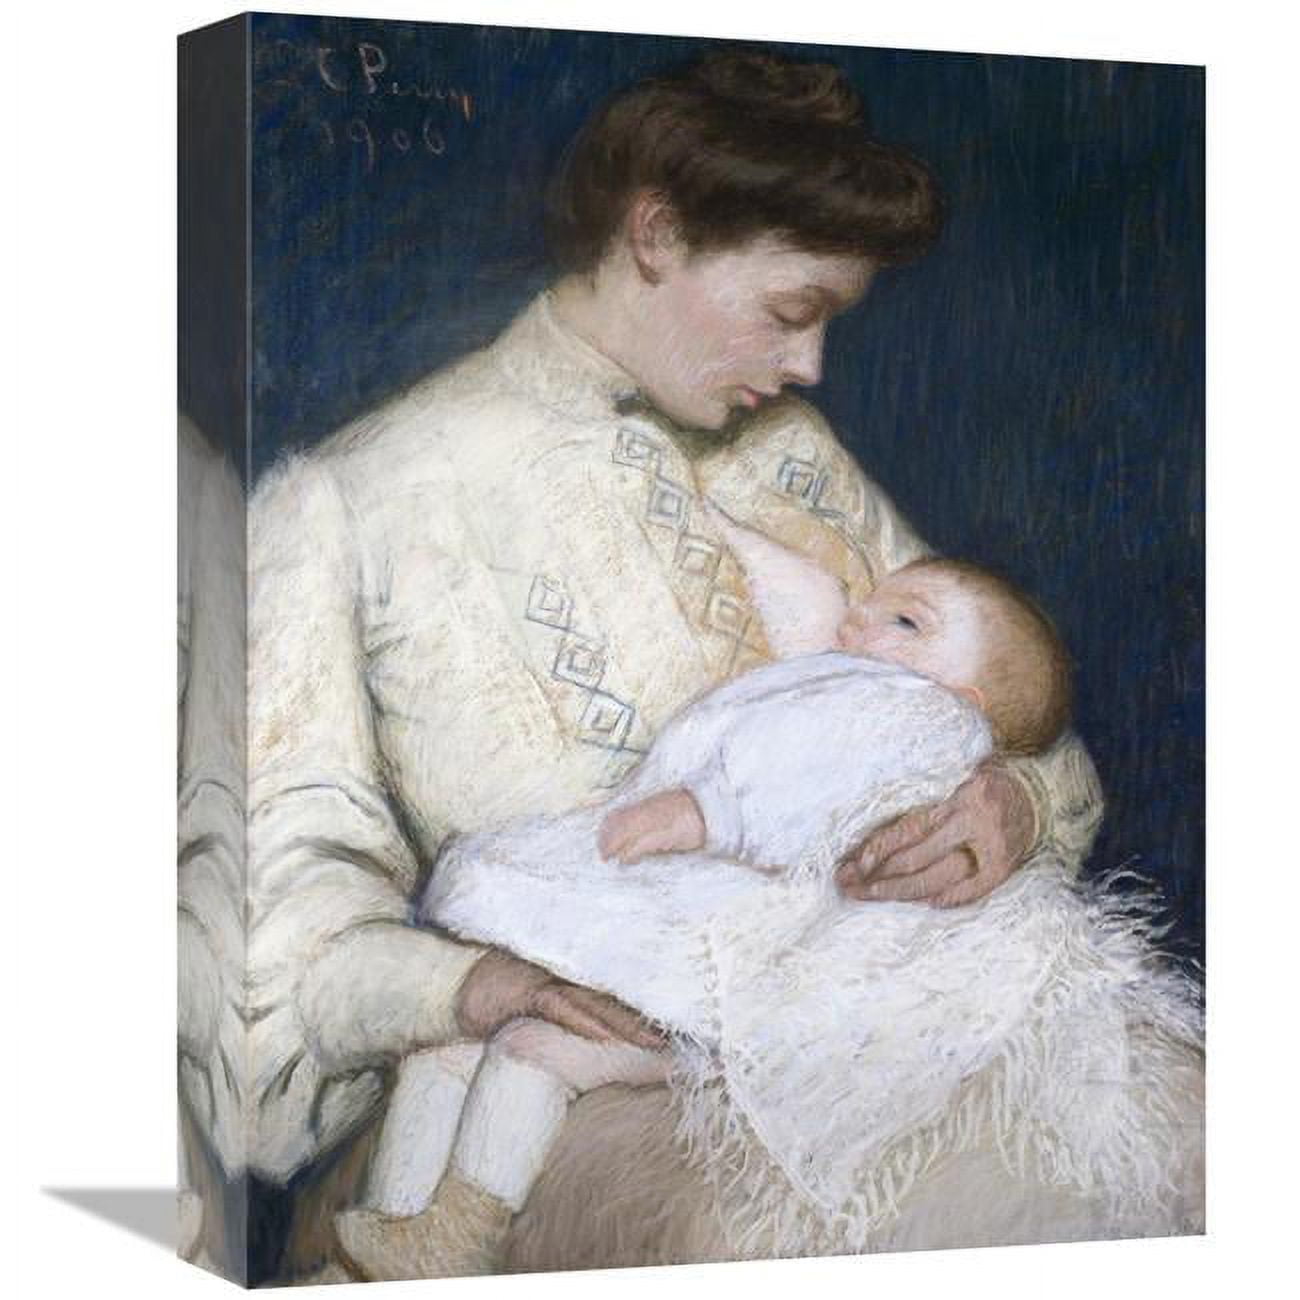 16 in. Nursing the Baby Art Print - Lilla Cabot Perry -  JensenDistributionServices, MI1274265